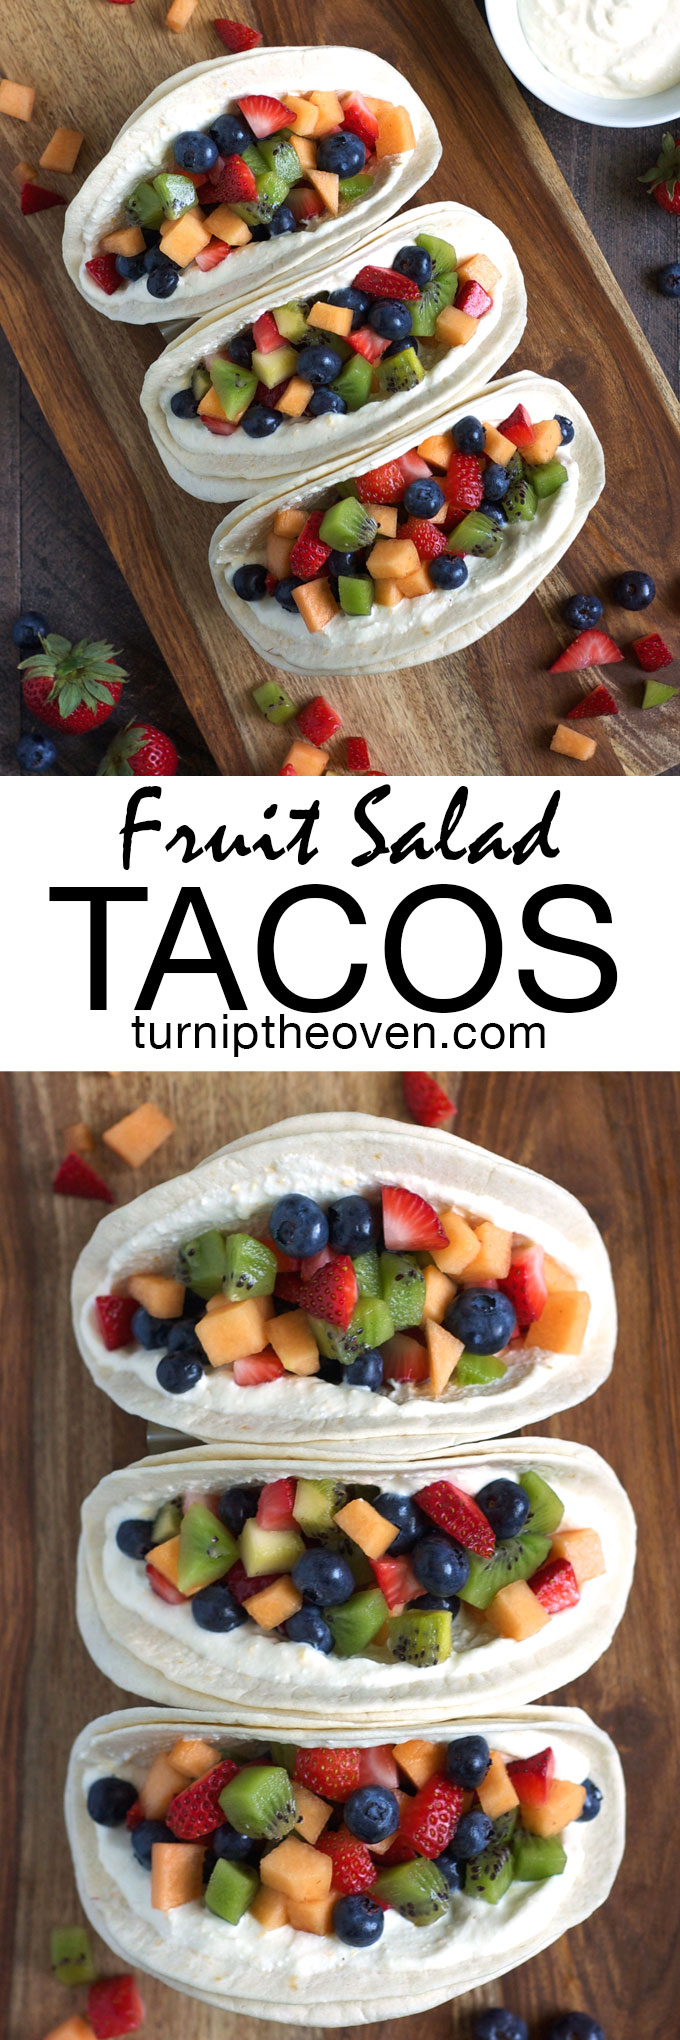 Fit more protein, calcium, and fresh fruit into your morning routine with these easy, healthy breakfast tacos slathered with honey whipped cottage cheese and piled high with fruit salad.